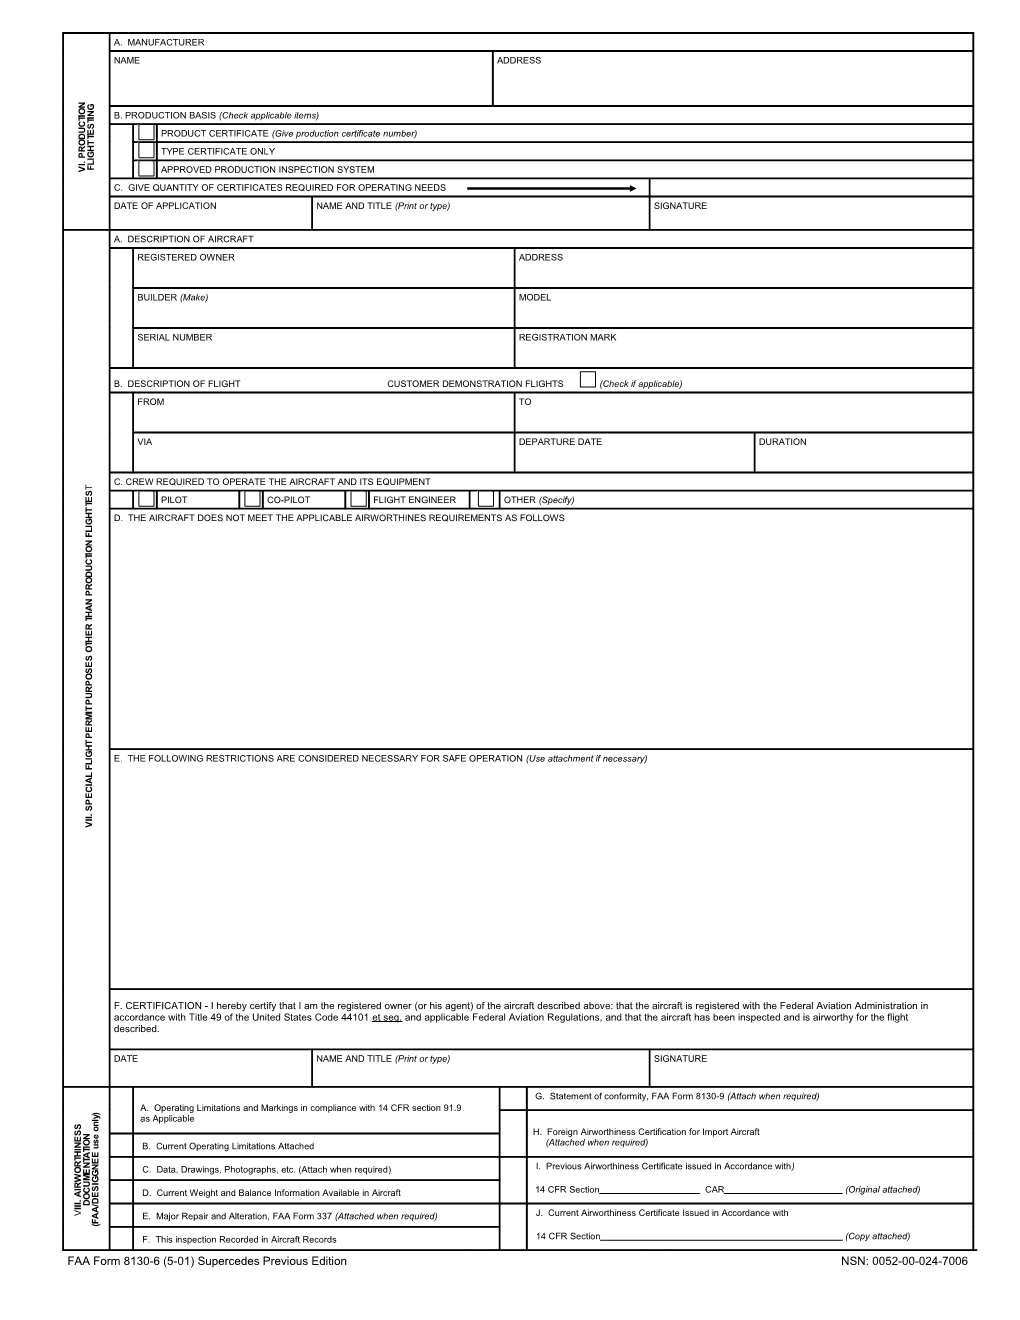 Tear Off This Cover Sheet Before Submitting This Form